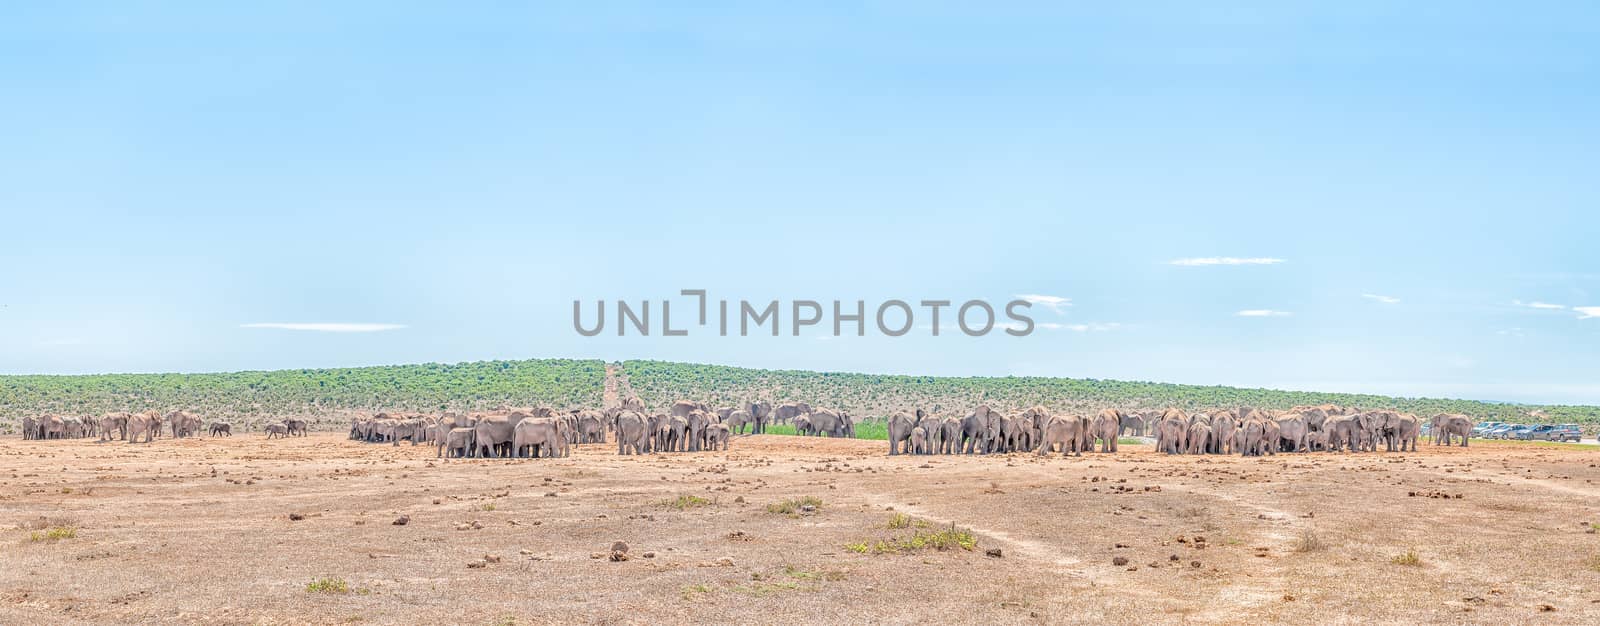 More than 200 elephants waiting to drink  by dpreezg